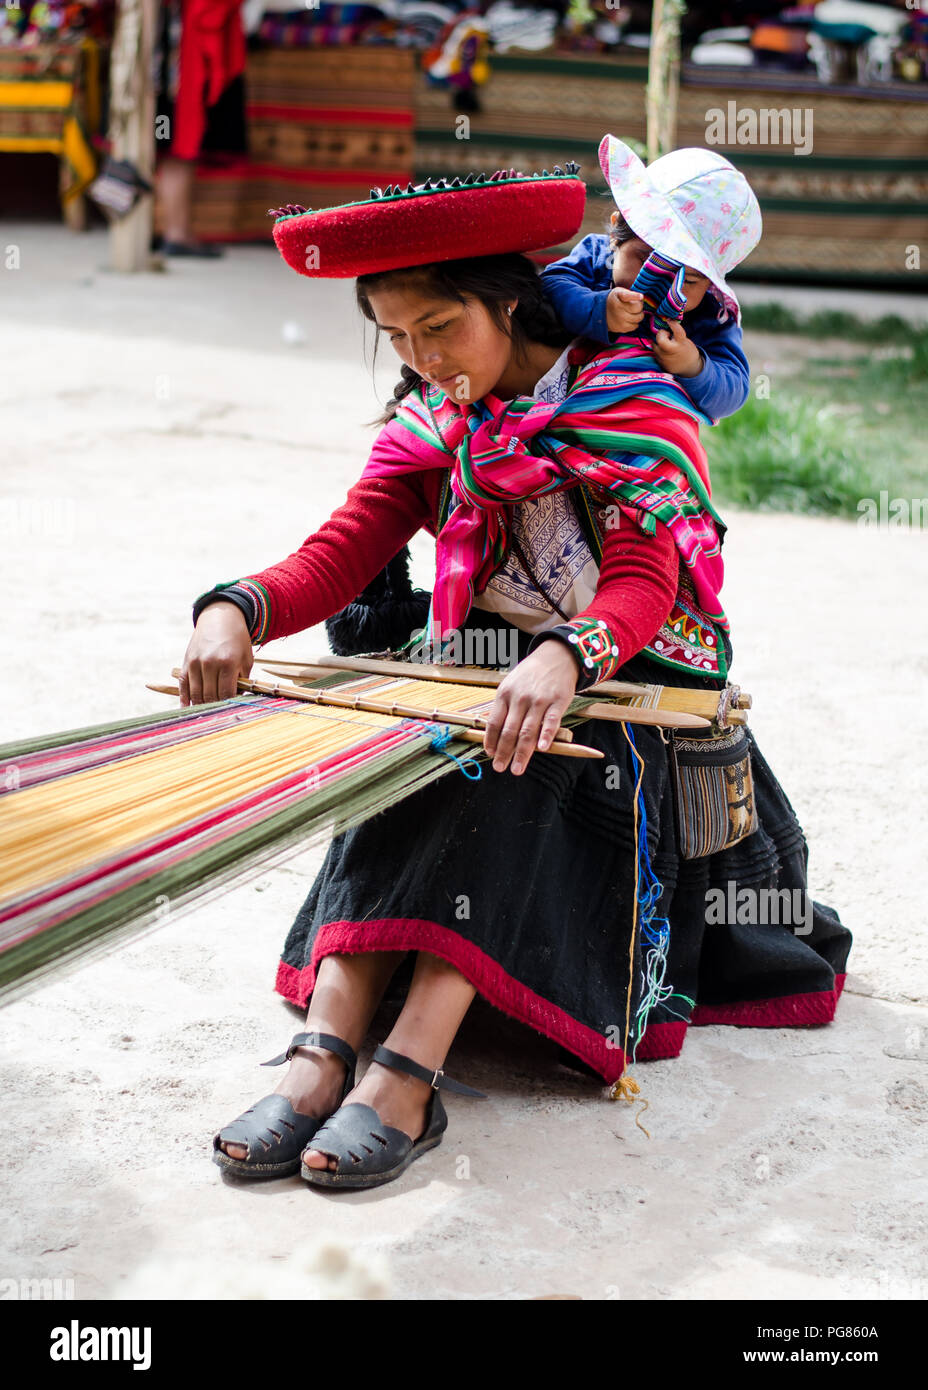 Quechua woman weaving textiles and carrying her baby Stock Photo